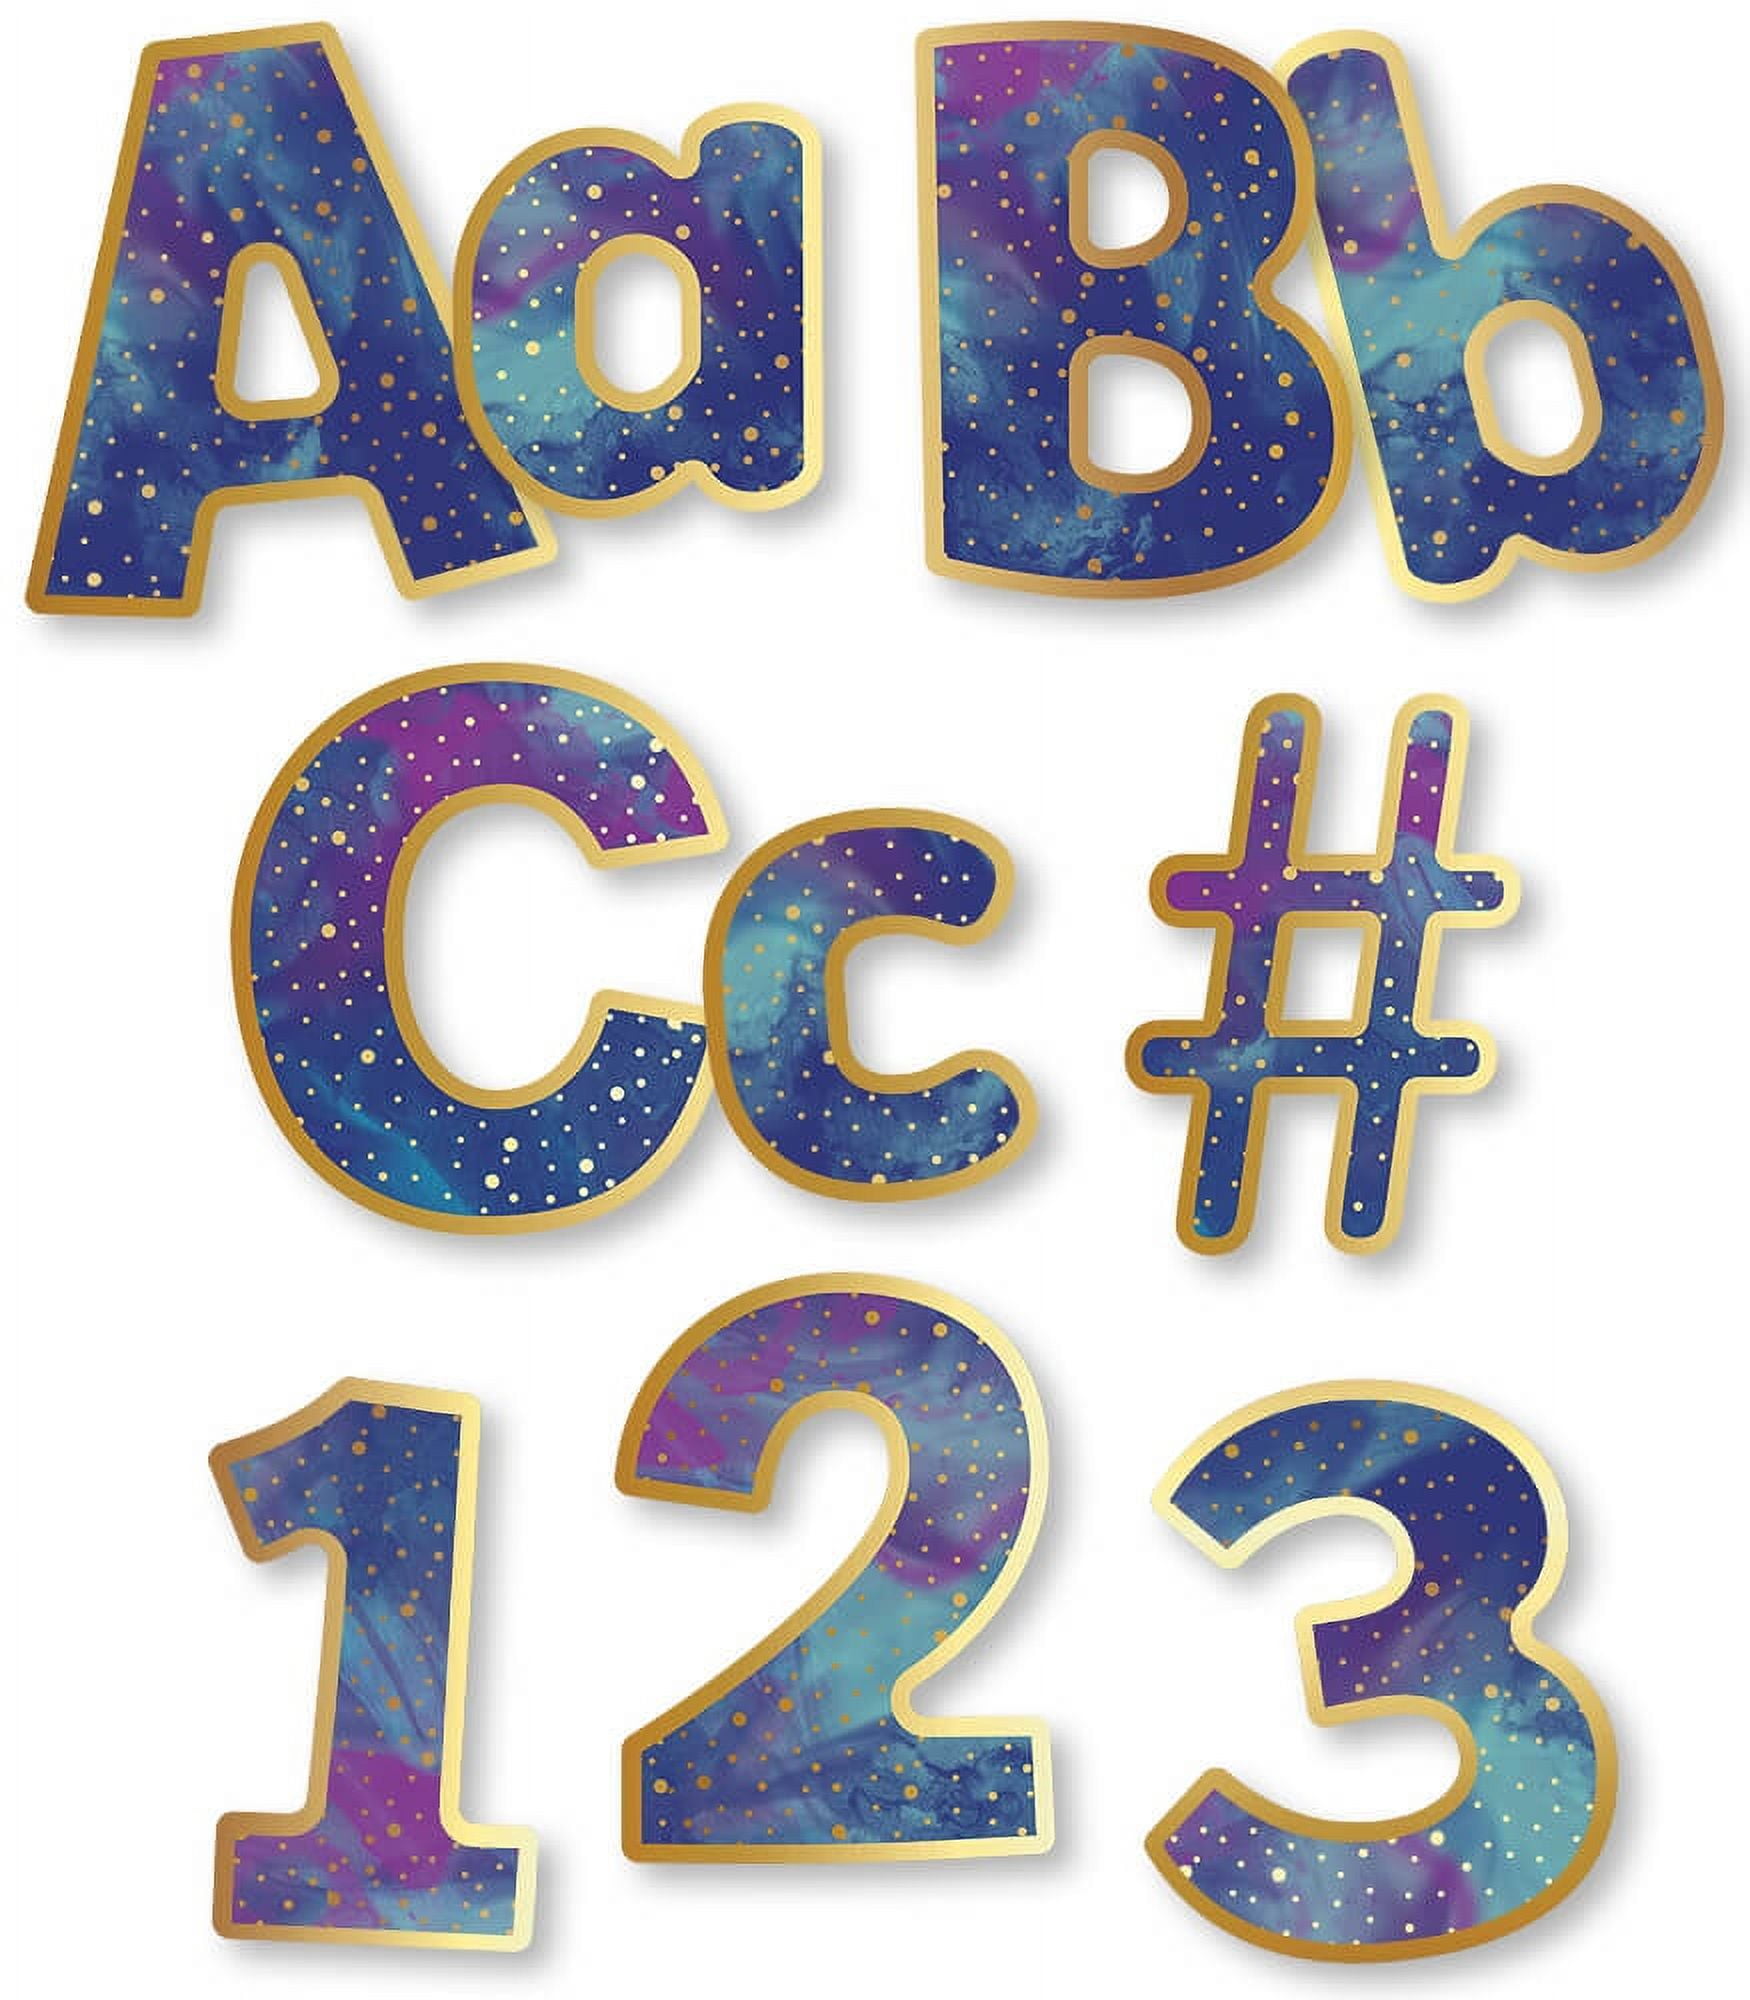 260 Pcs Gold Bulletin Board Letters for Classroom 4” Letters Combo Pack Set  Foil Balloon Classroom Decorations Alphabet Numbers Symbols Letters for